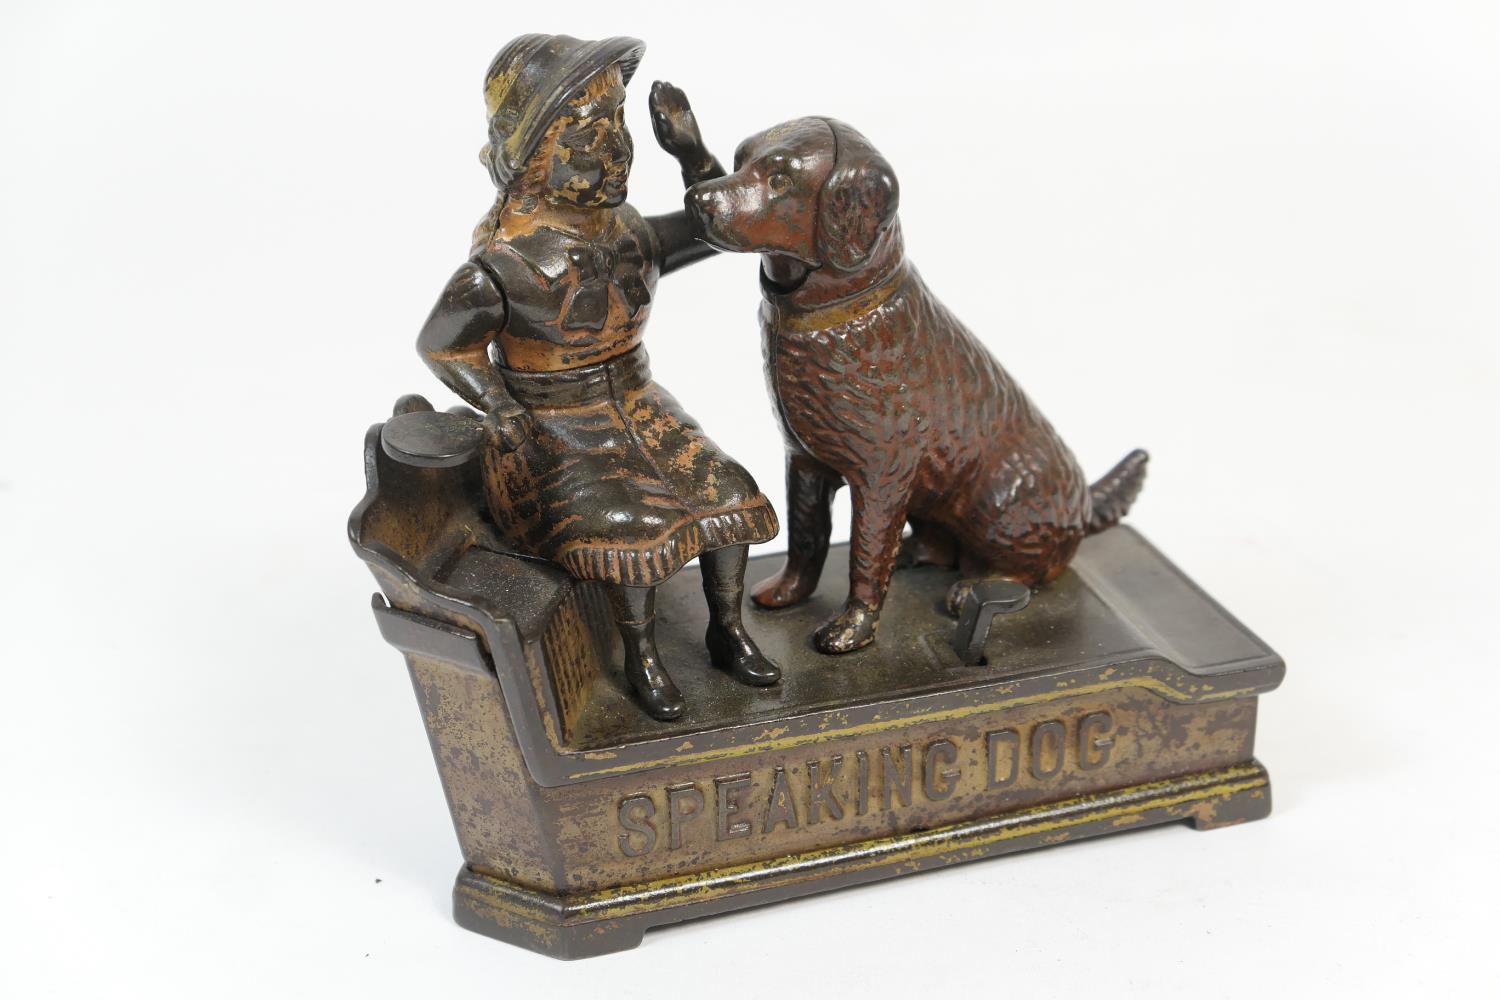 Novelty painted cast iron money box, formed as a speaking dog, from an 1885 patent, height 18cm (